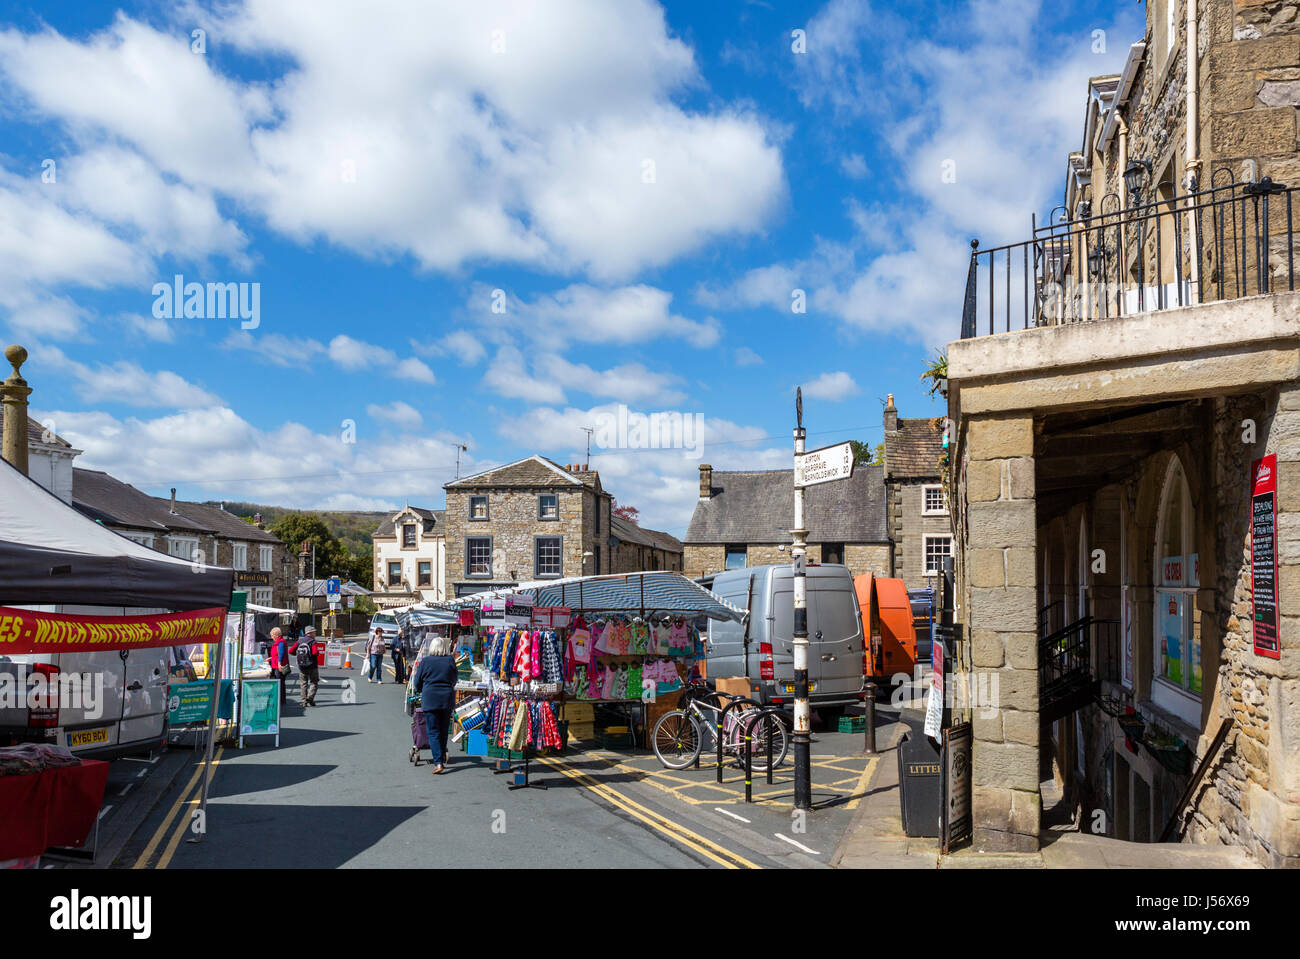 Tuesday market on Cheapside in the town centre, Settle, Yorkshire Dales, North Yorkshire, England, UK. Stock Photo